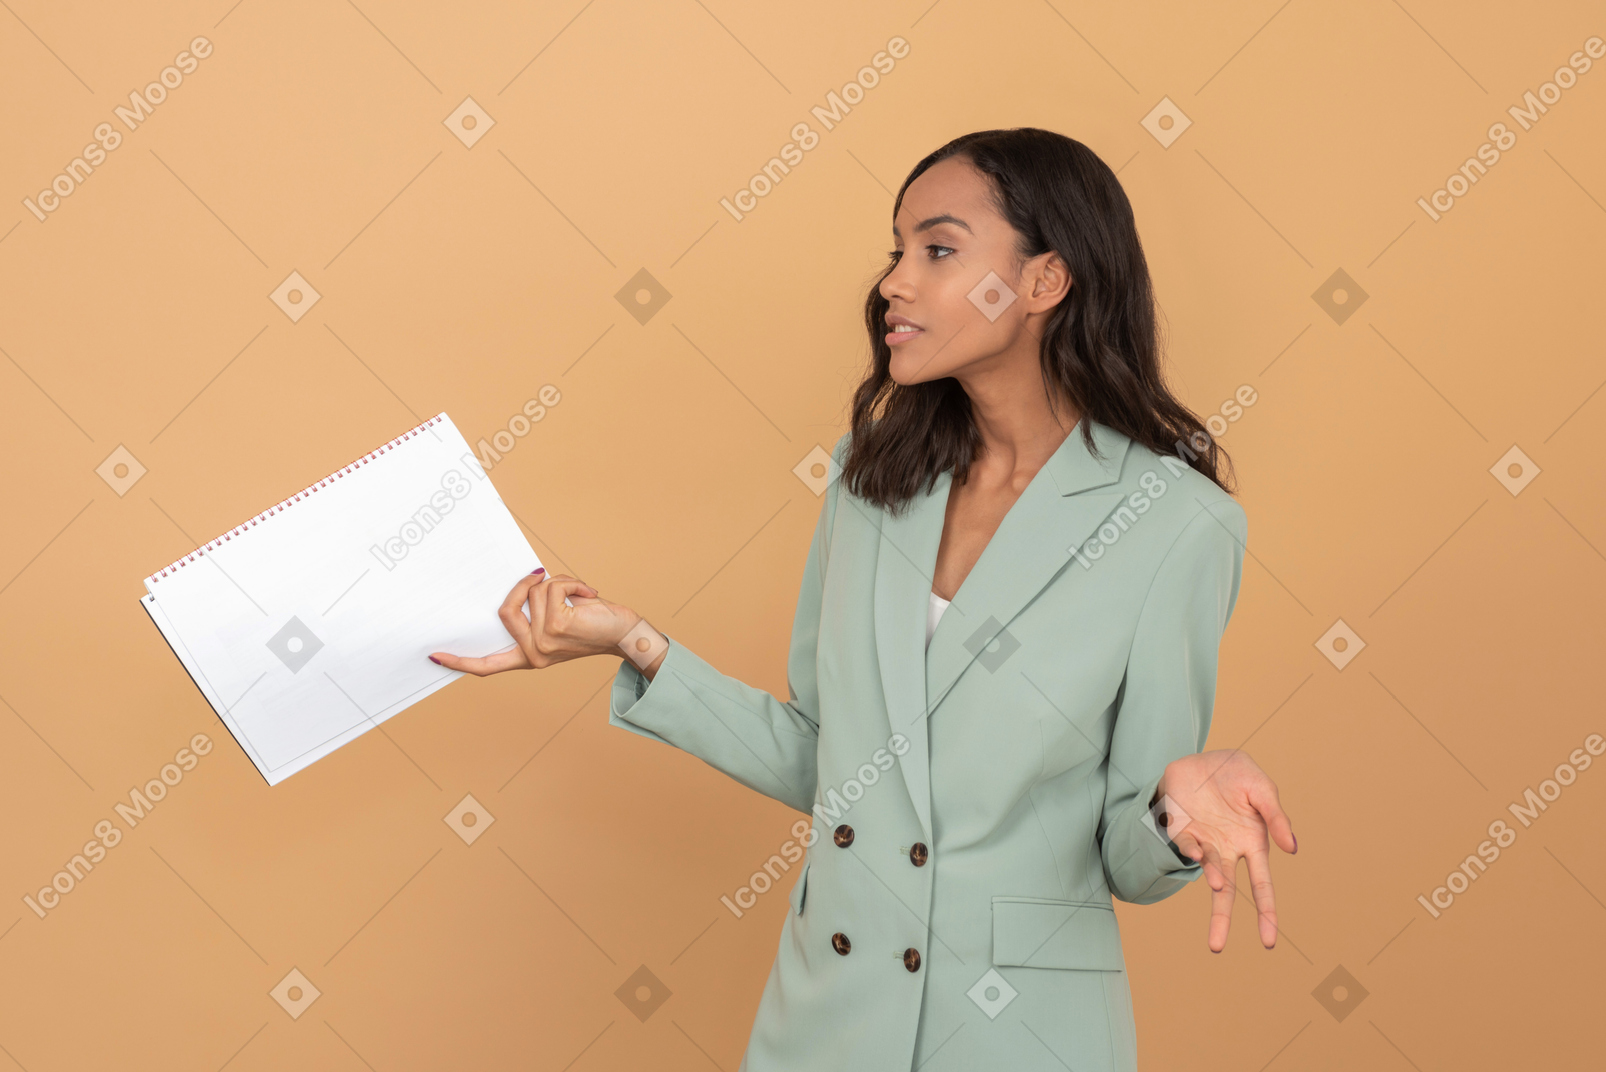 Attractive young office worker holding bunch of papers